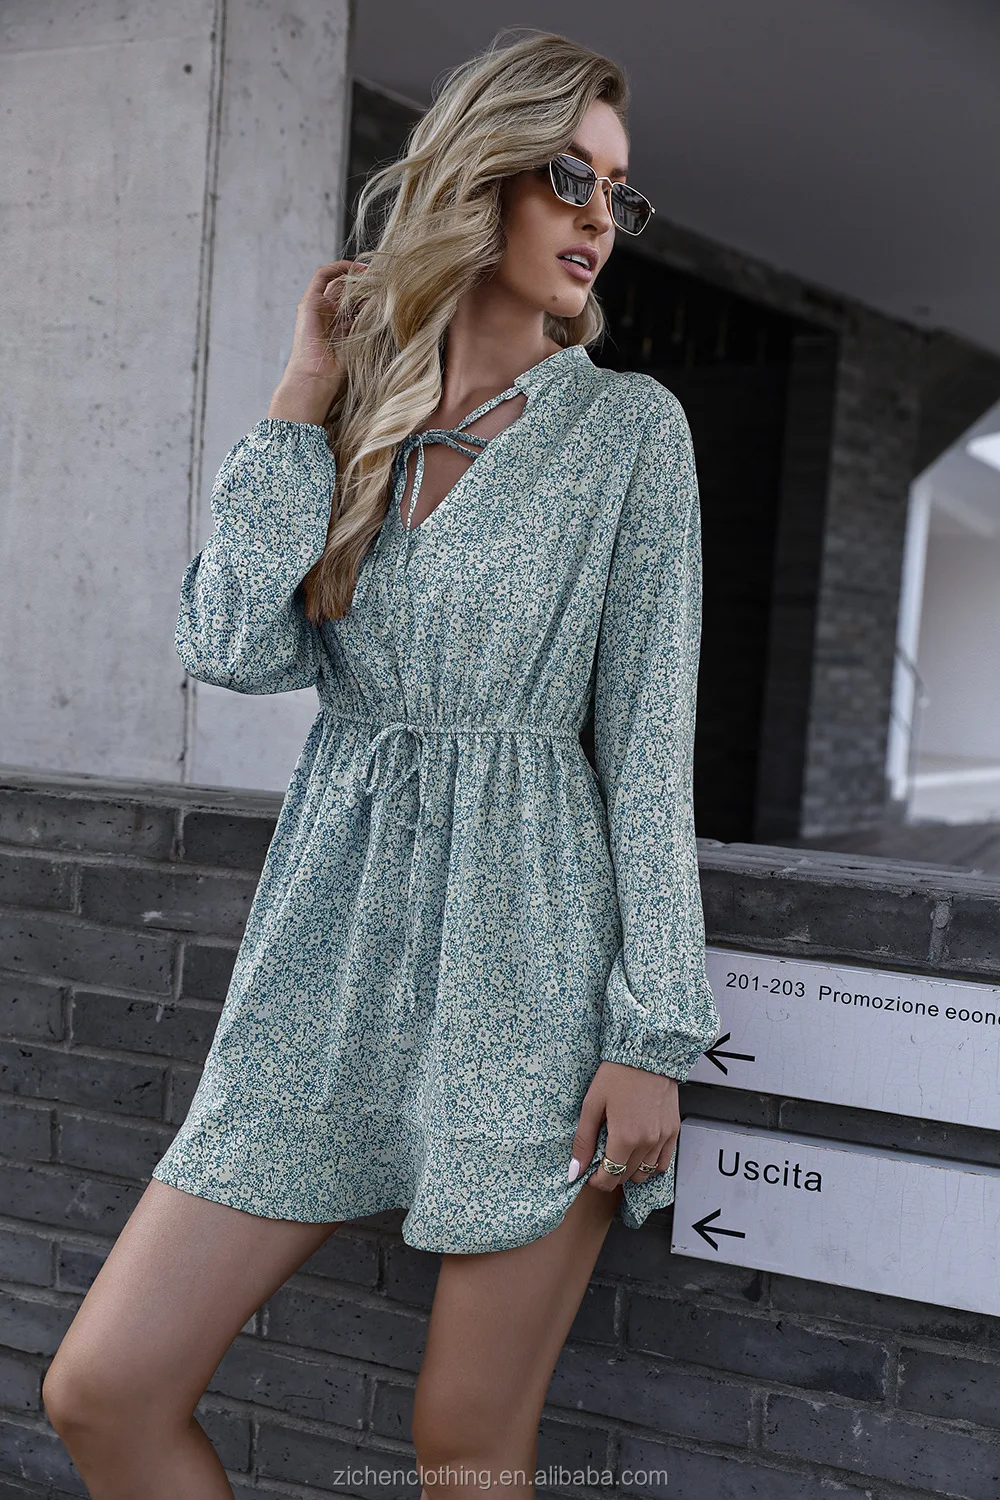 Zc00023 Spring Summer Ladies Fashion Dress Women Casual Solid Color Long  Sleeve Loose Floral Print Cute Dress Woman - Buy Floral Print Dress,Dresses  